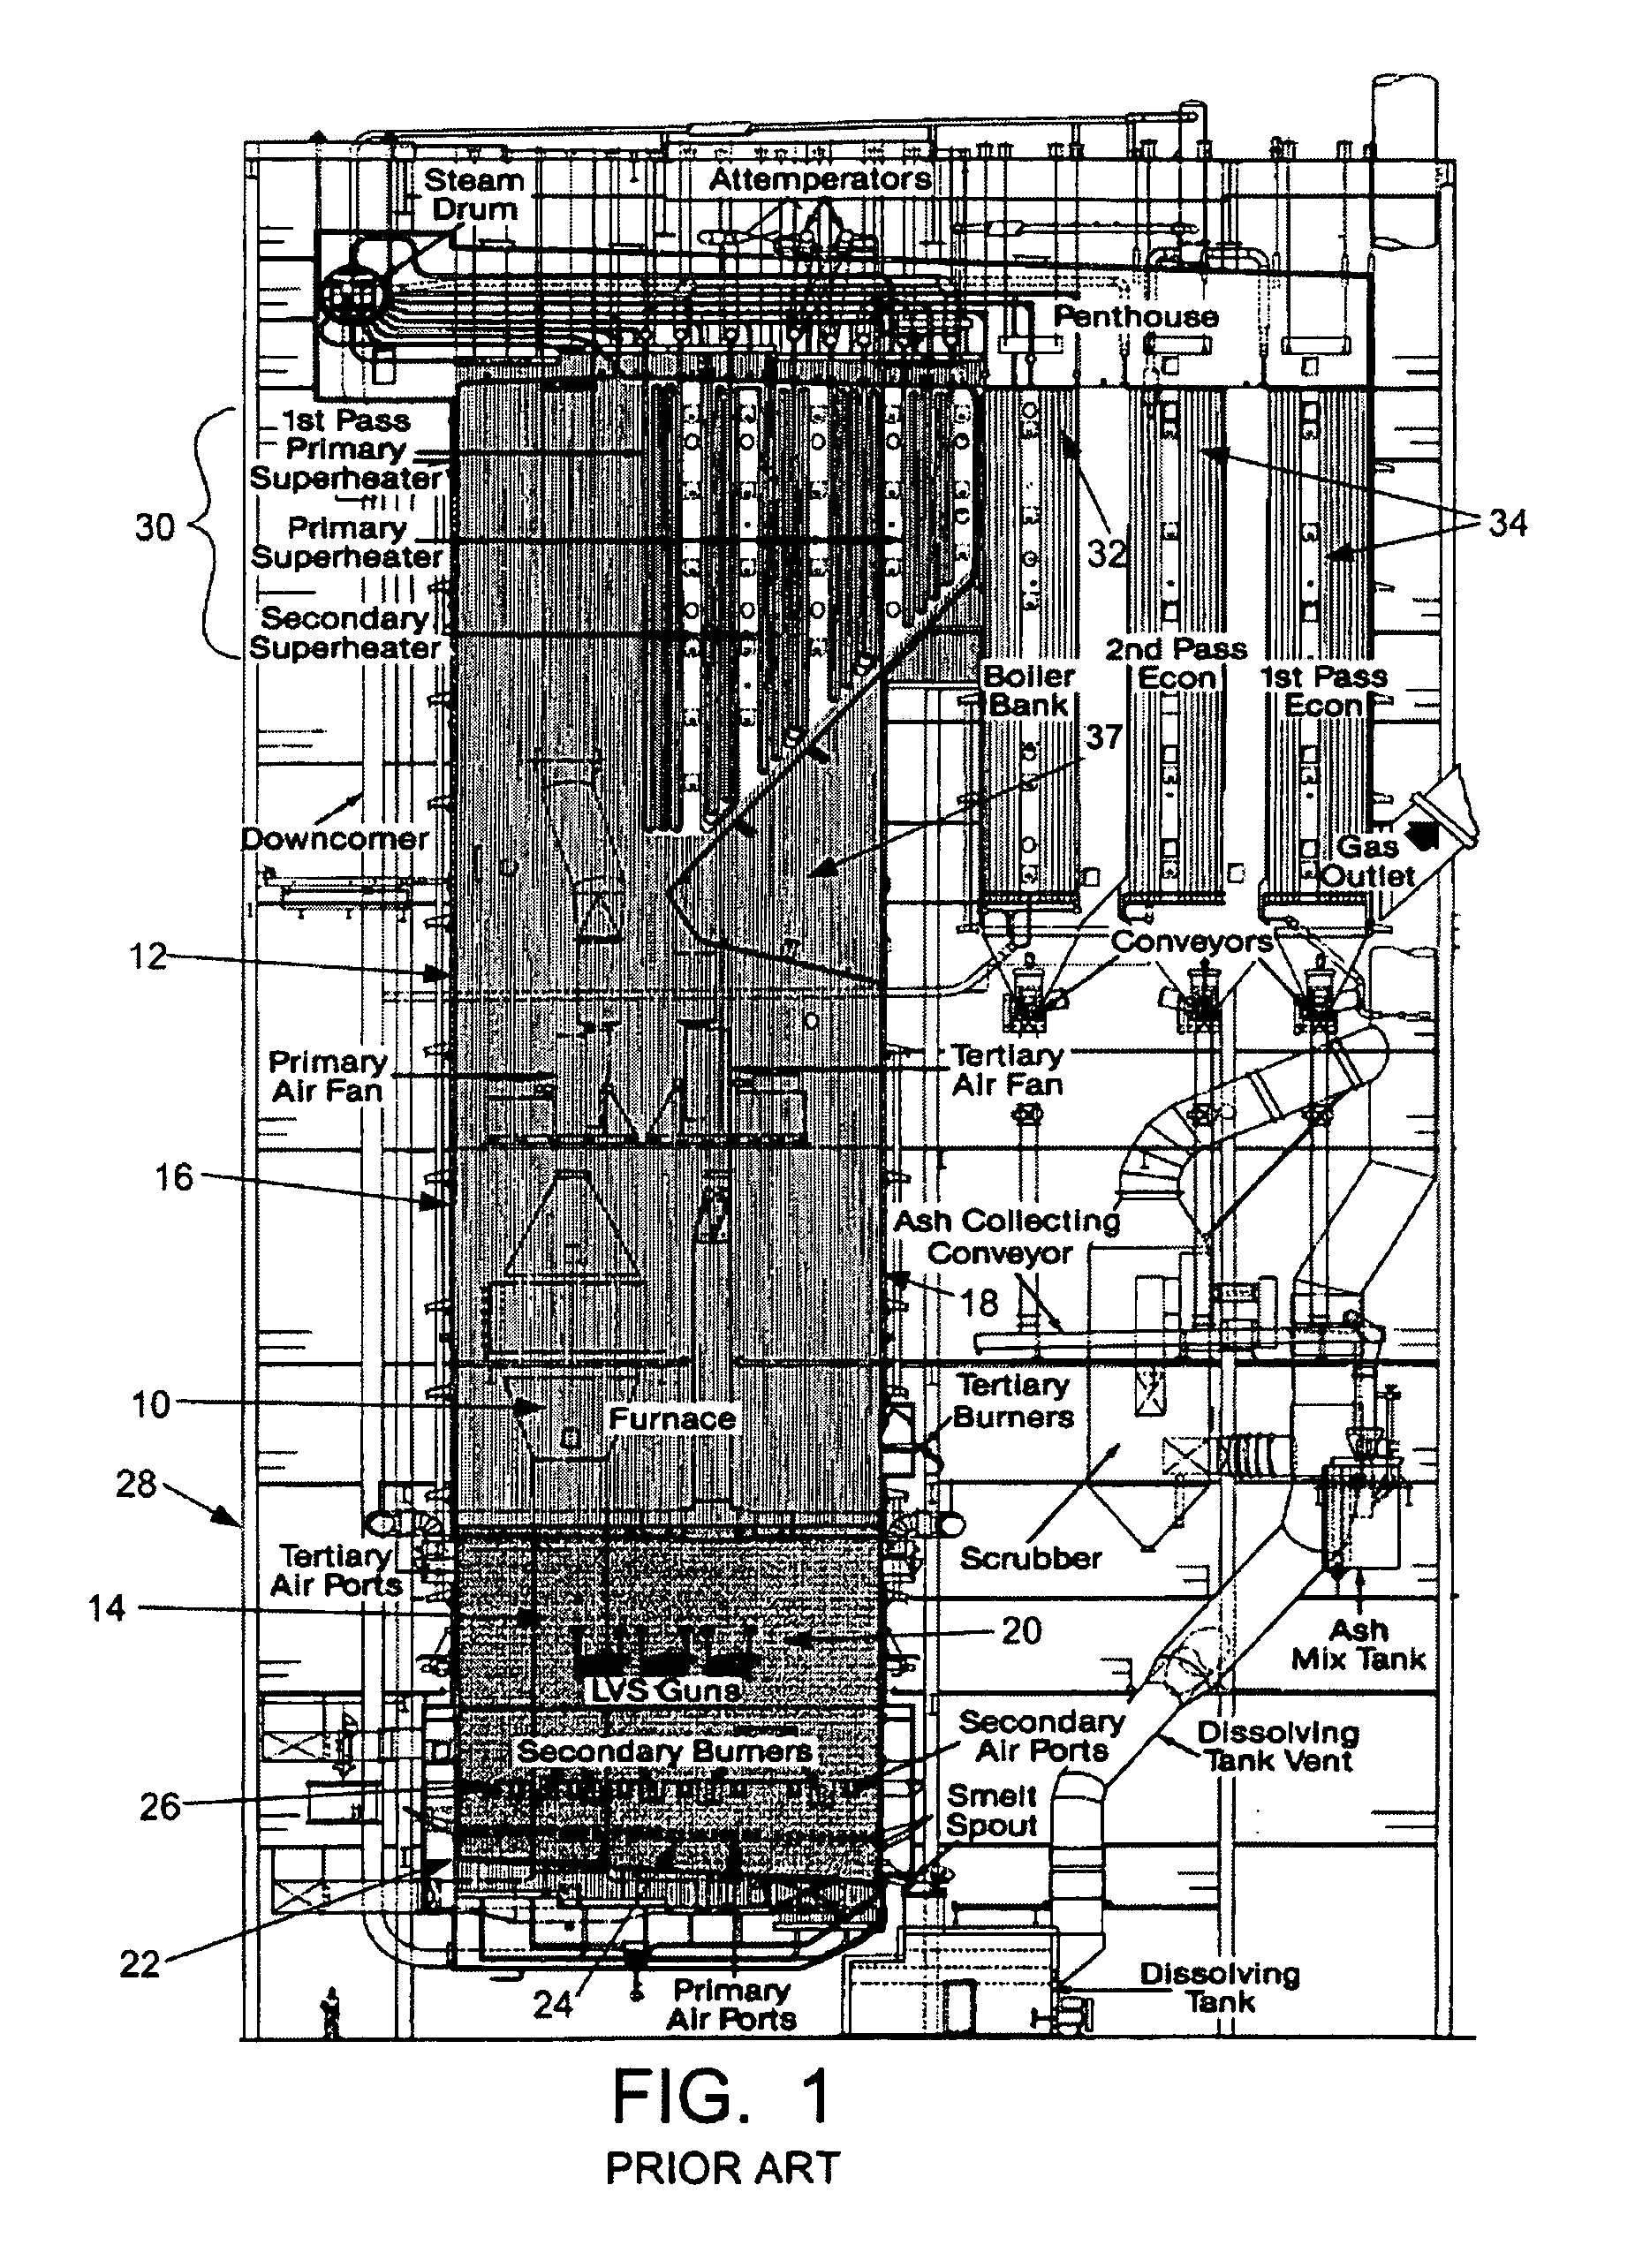 Enhanced steam cycle utilizing a dual pressure recovery boiler with reheat